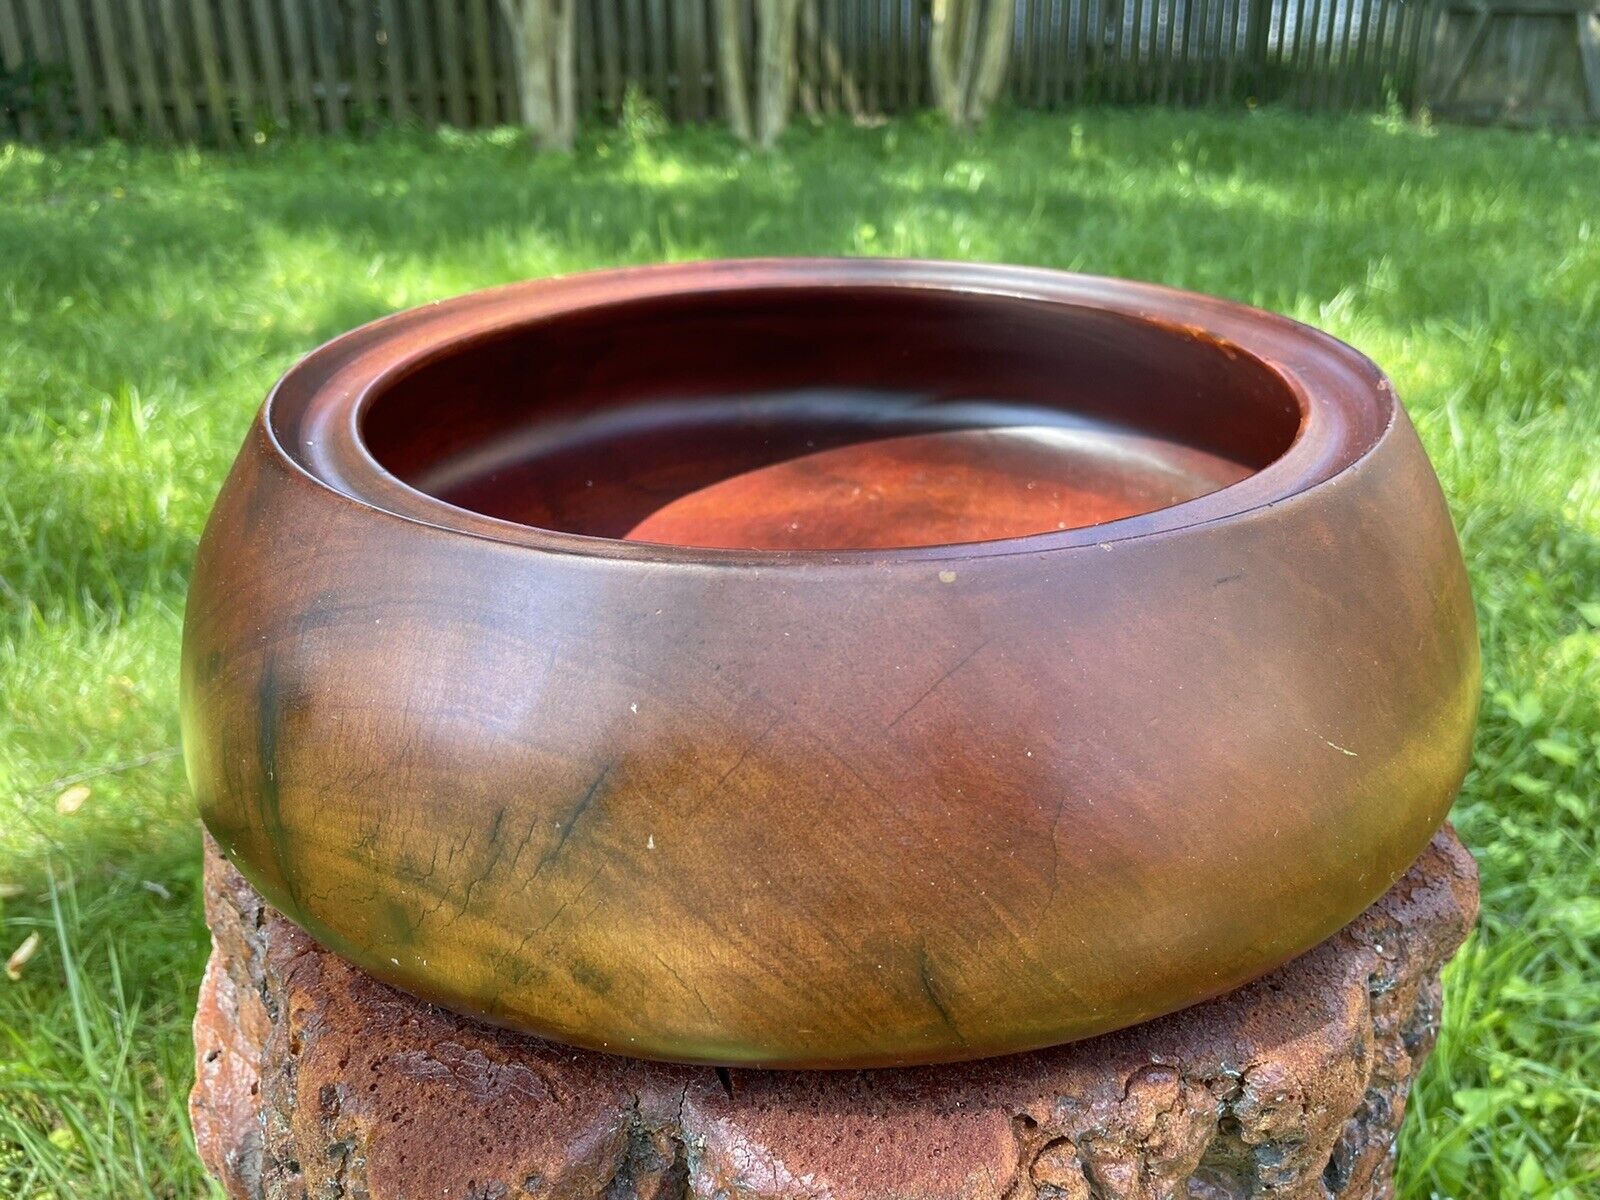 RARE: 1960s-Huge Bowl Hand Crafted from A Single Solid Wood-11.25”x13.75”x3.75”